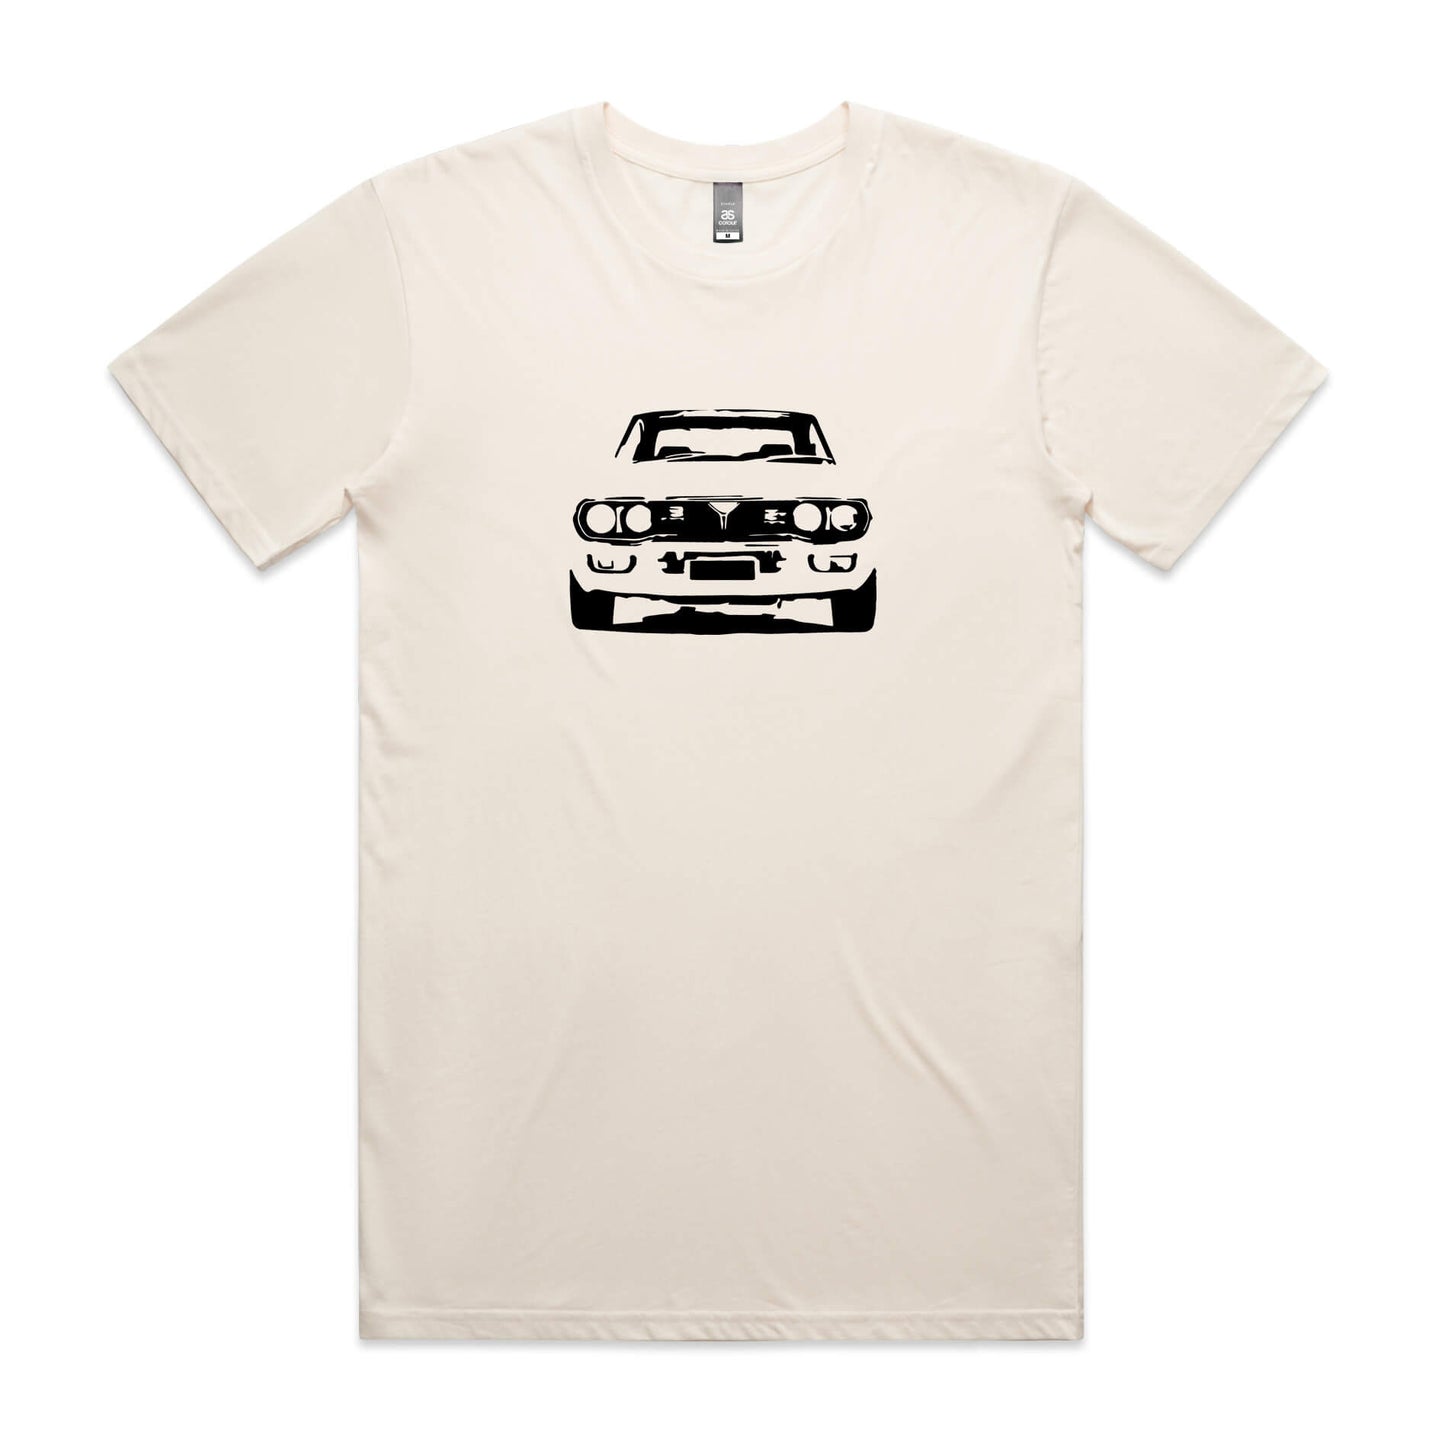 Mazda RX4 t-shirt in beige with black rotary engine car graphic